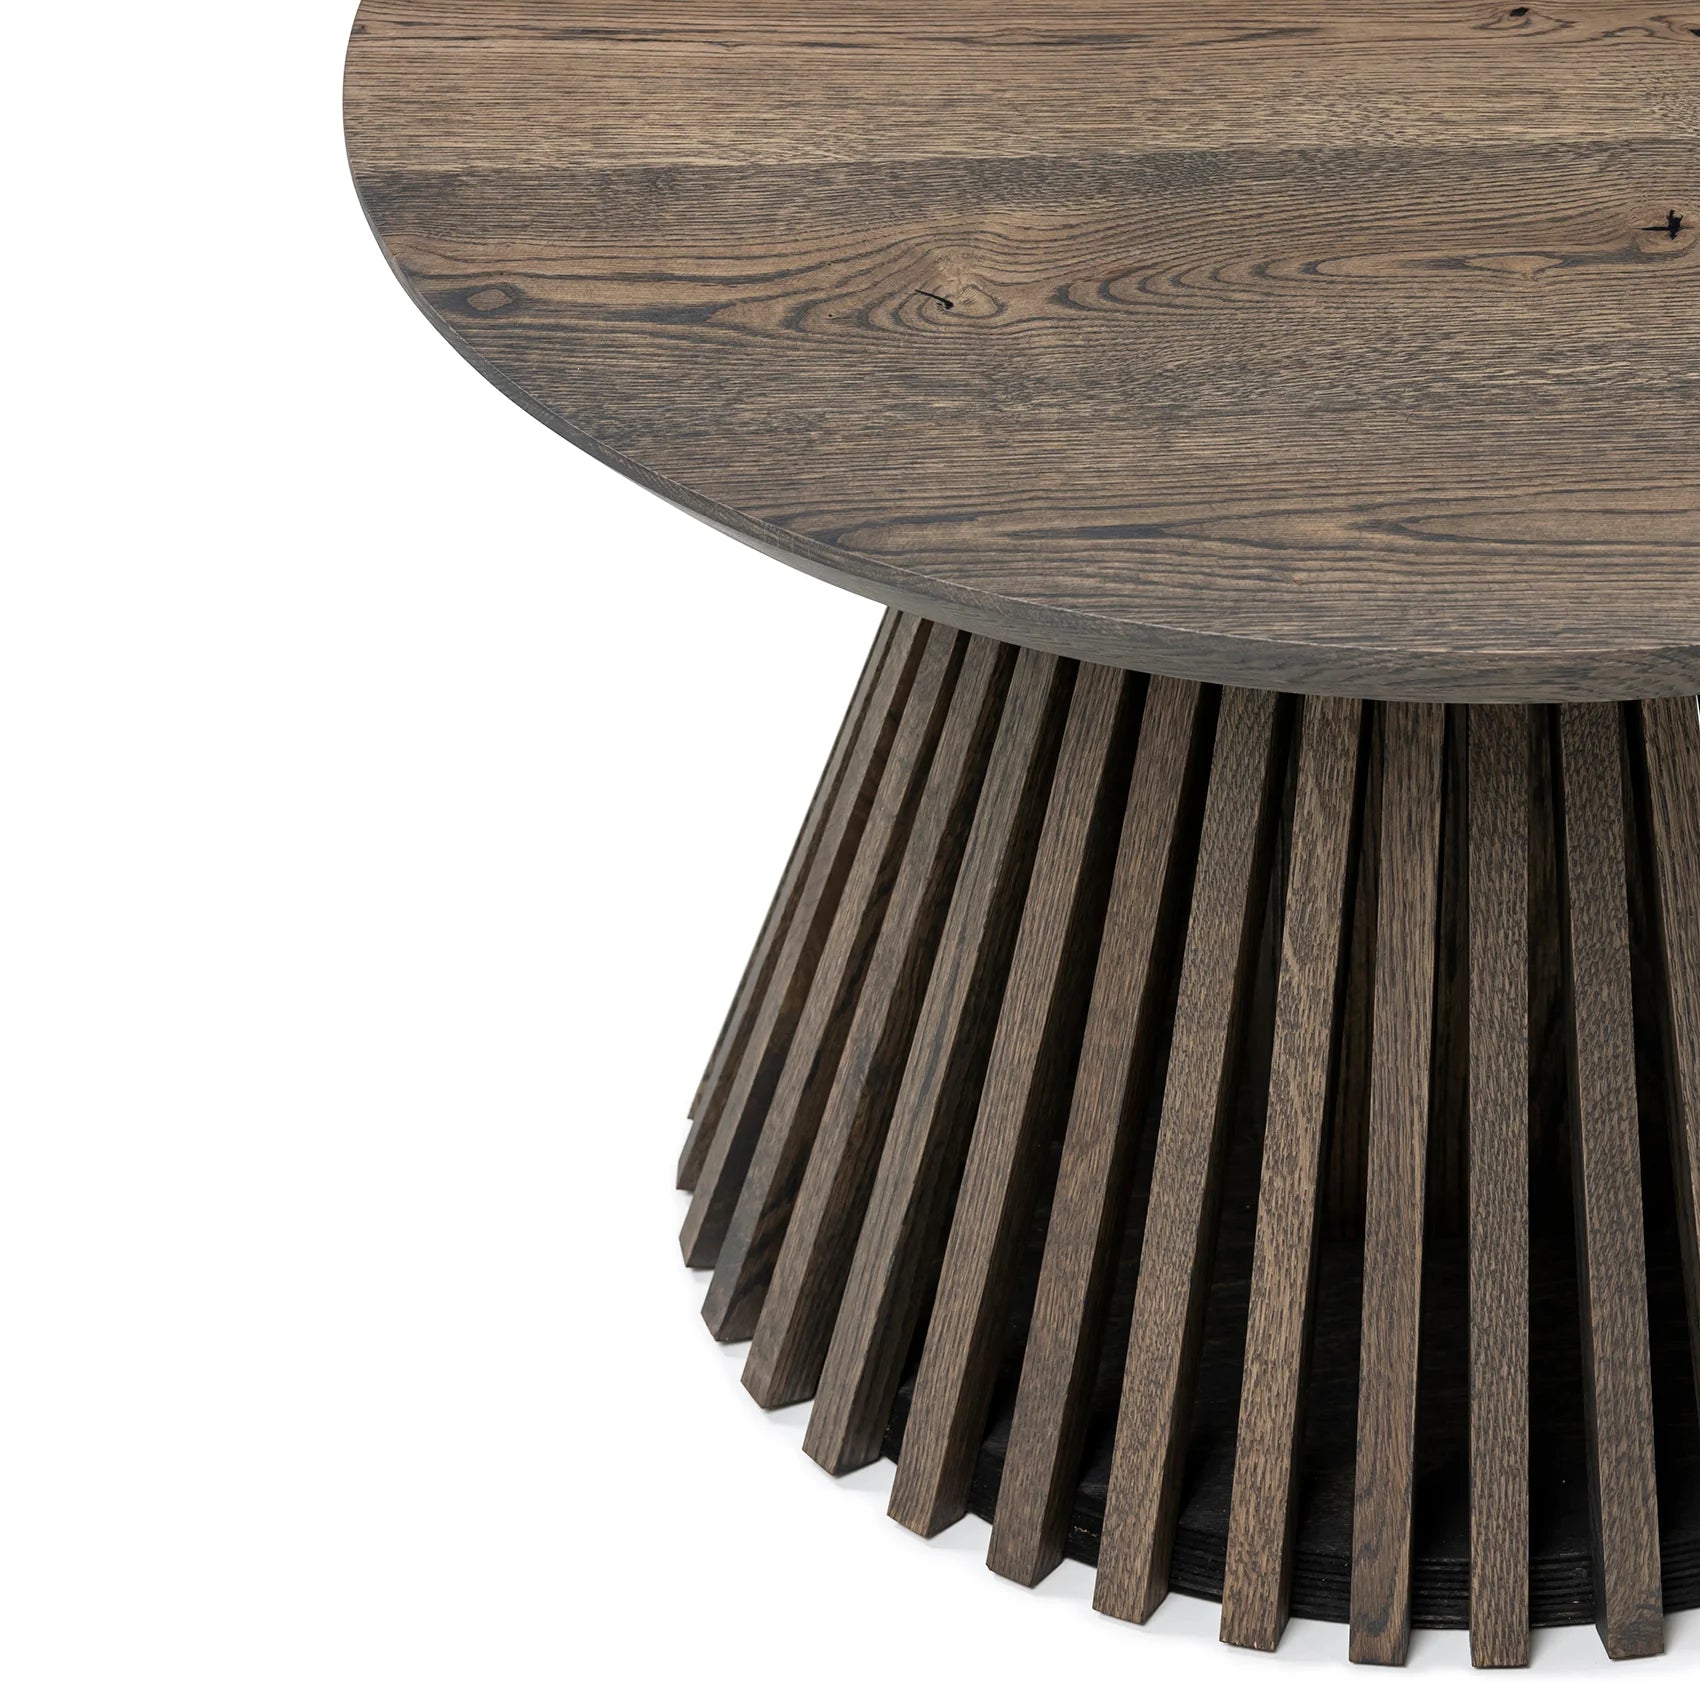 Charcoal Round Oak Coffee Table - S10Home